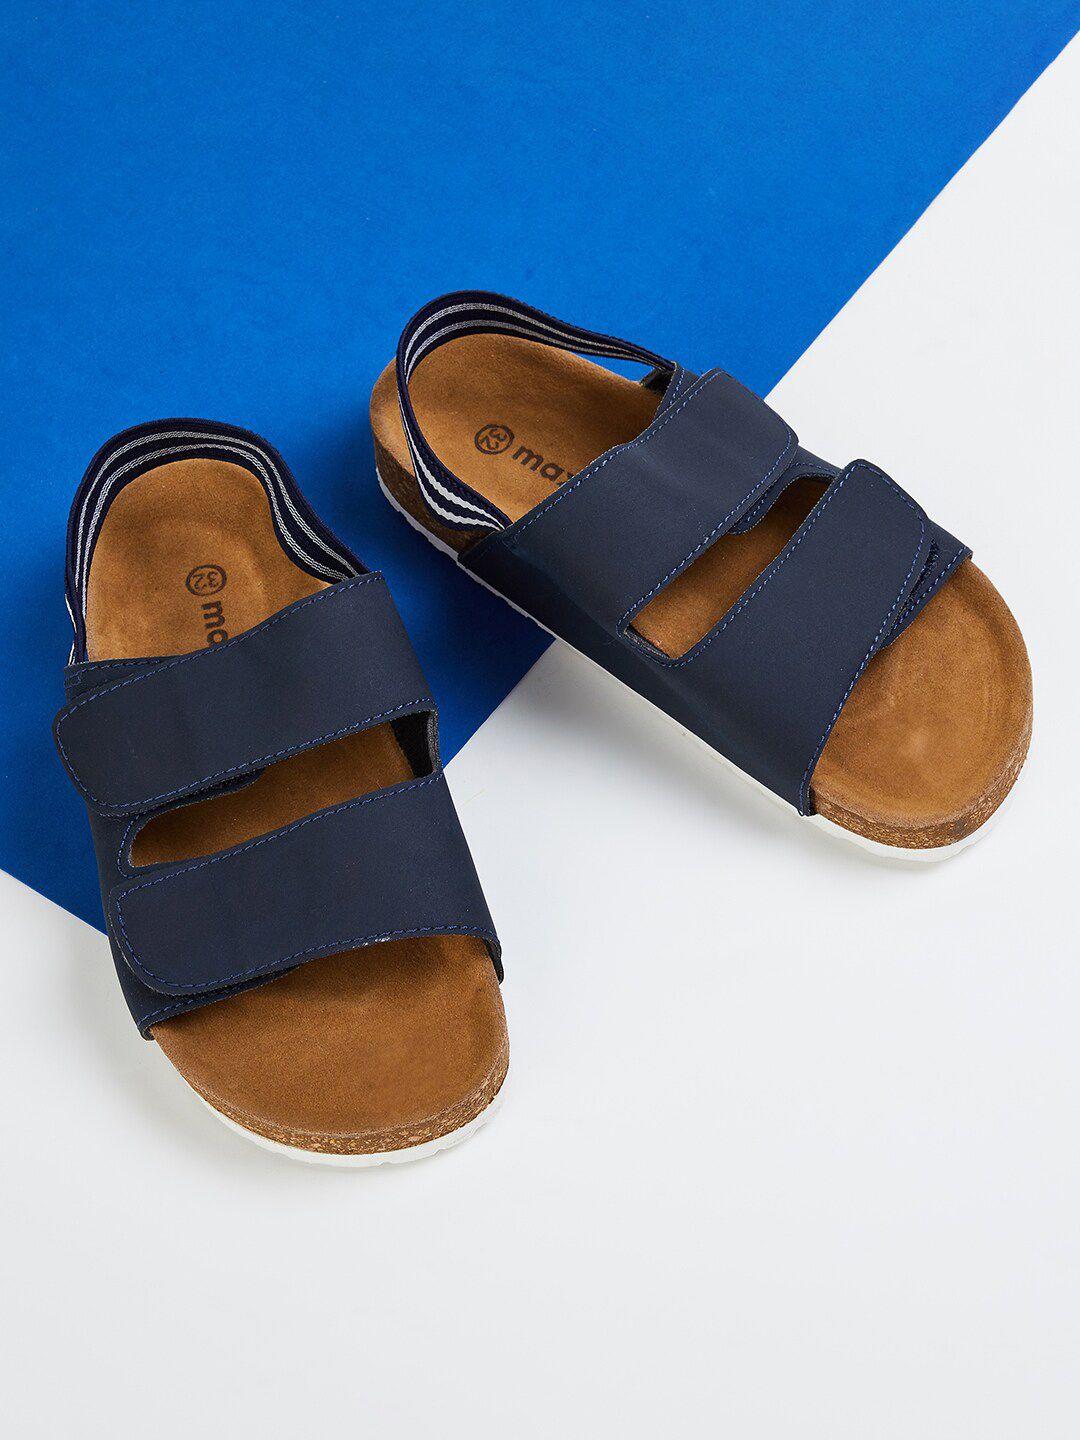 max-boys-comfort-sandals-with-backstrap